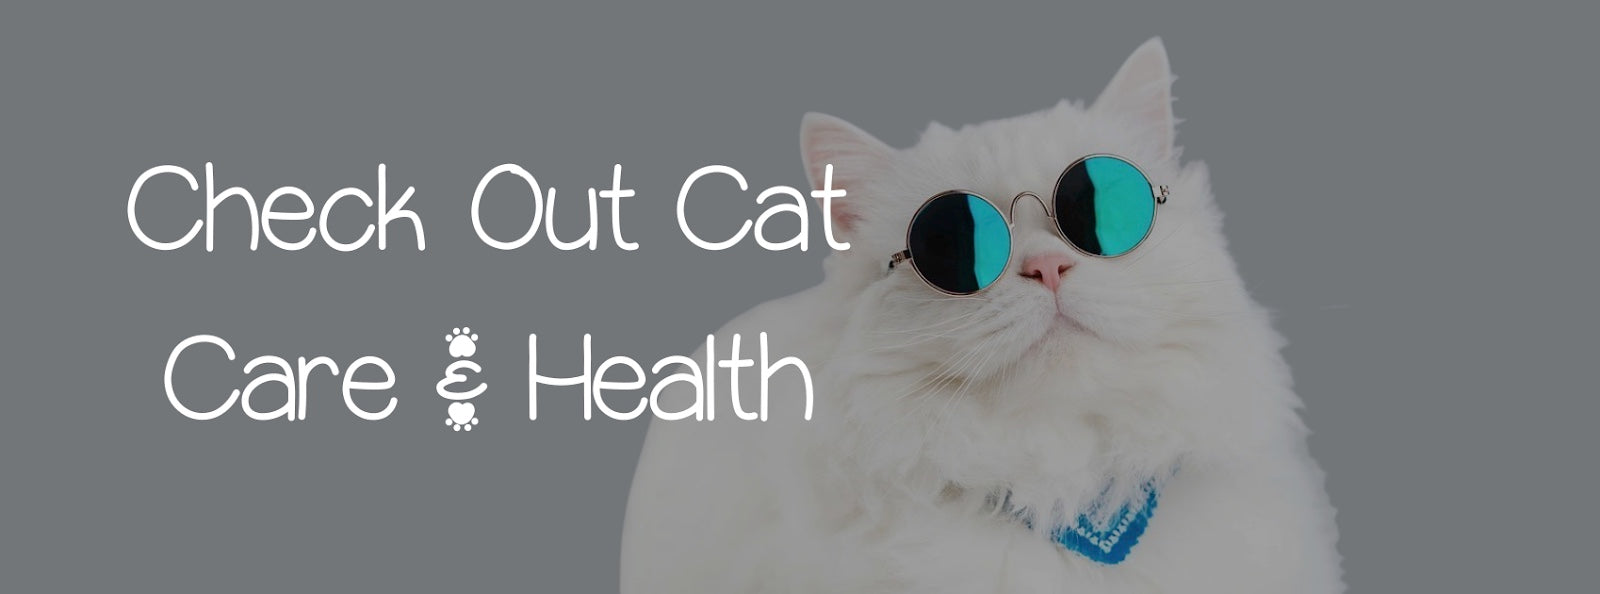 CHECK OUT CAT CARE & HEALTH